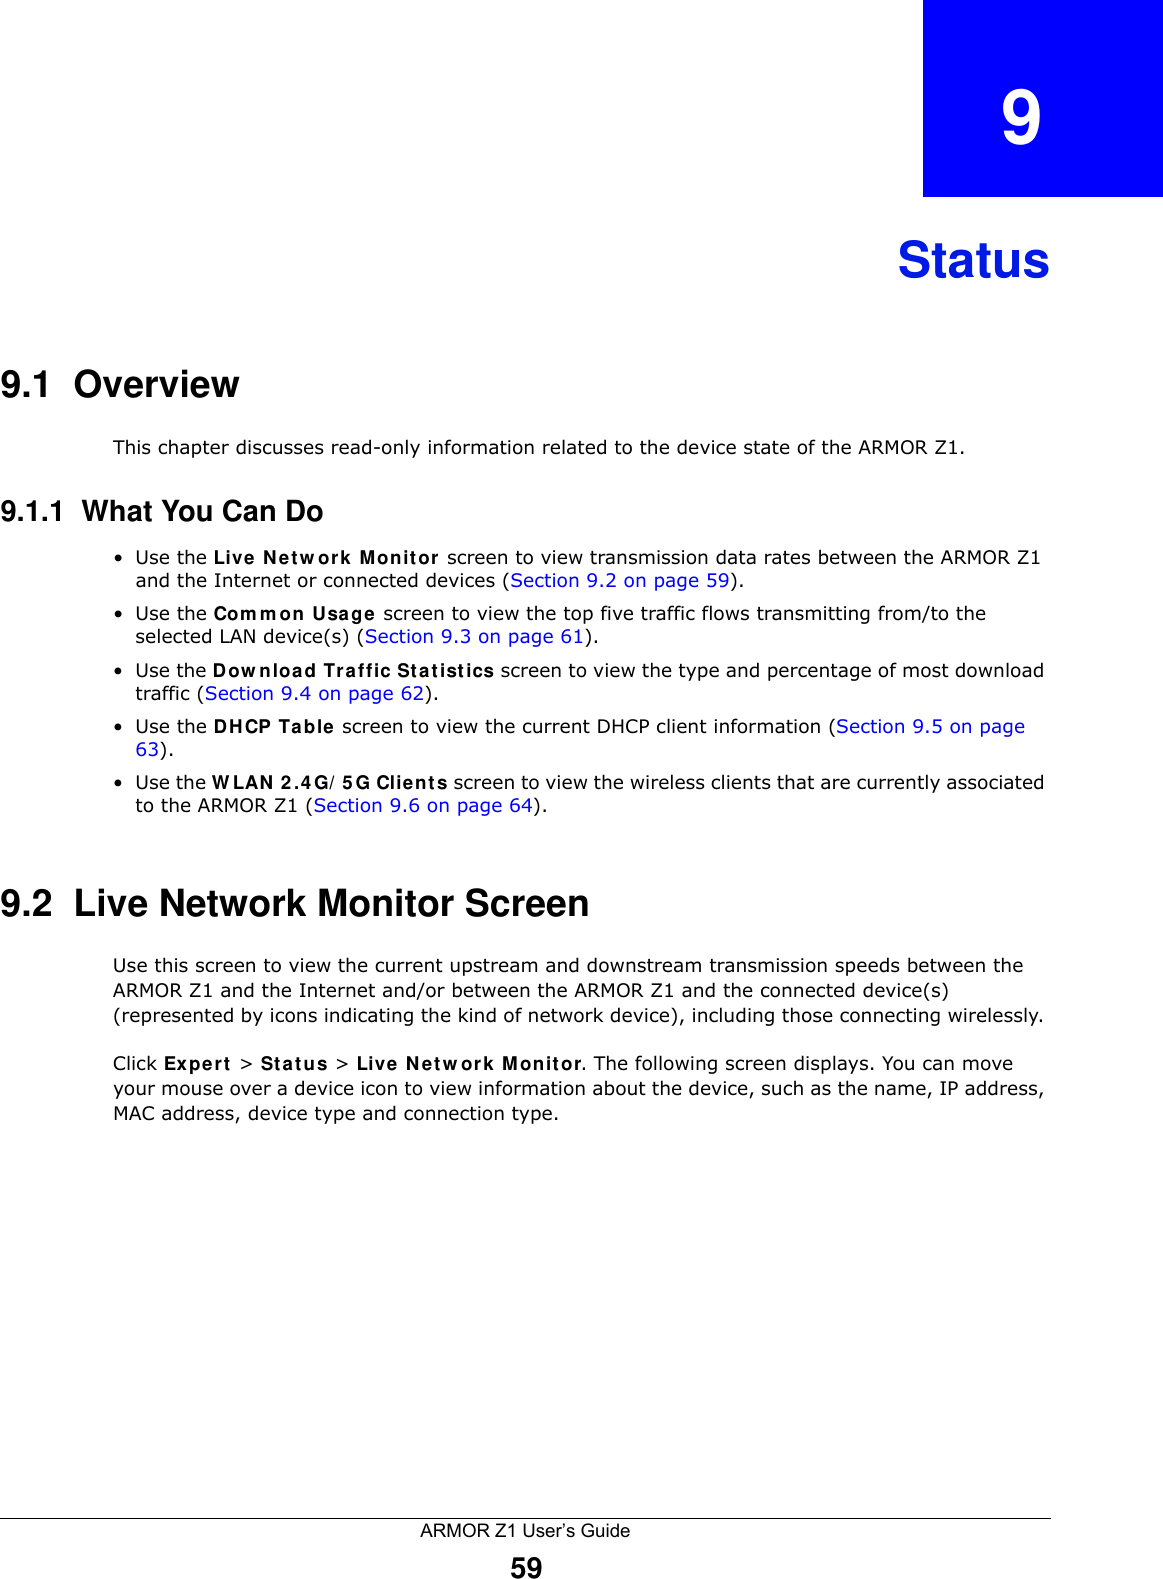 ARMOR Z1 User’s Guide59CHAPTER   9Status9.1  OverviewThis chapter discusses read-only information related to the device state of the ARMOR Z1.9.1.1  What You Can Do•Use the Live Network Monitor screen to view transmission data rates between the ARMOR Z1 and the Internet or connected devices (Section 9.2 on page 59).•Use the Common Usage screen to view the top five traffic flows transmitting from/to the selected LAN device(s) (Section 9.3 on page 61).•Use the Download Traffic Statistics screen to view the type and percentage of most download traffic (Section 9.4 on page 62). •Use the DHCP Table screen to view the current DHCP client information (Section 9.5 on page 63). •Use the WLAN 2.4G/5G Clients screen to view the wireless clients that are currently associated to the ARMOR Z1 (Section 9.6 on page 64). 9.2  Live Network Monitor ScreenUse this screen to view the current upstream and downstream transmission speeds between the ARMOR Z1 and the Internet and/or between the ARMOR Z1 and the connected device(s) (represented by icons indicating the kind of network device), including those connecting wirelessly. Click Expert &gt; Status &gt; Live Network Monitor. The following screen displays. You can move your mouse over a device icon to view information about the device, such as the name, IP address, MAC address, device type and connection type. 